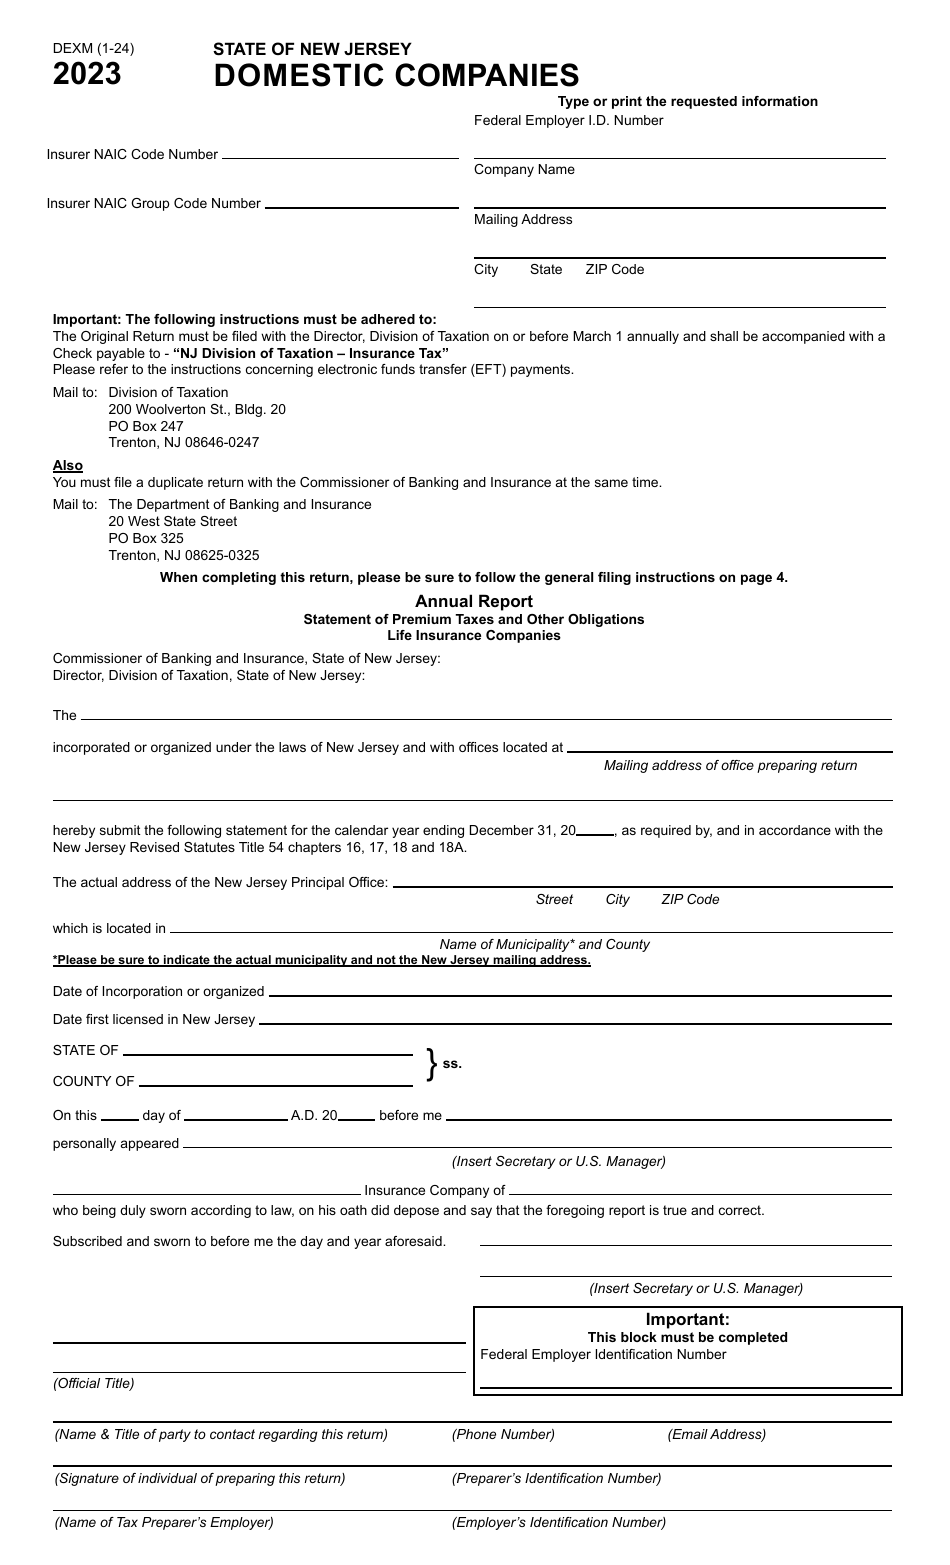 Form DEXM Domestic Companies - New Jersey, Page 1